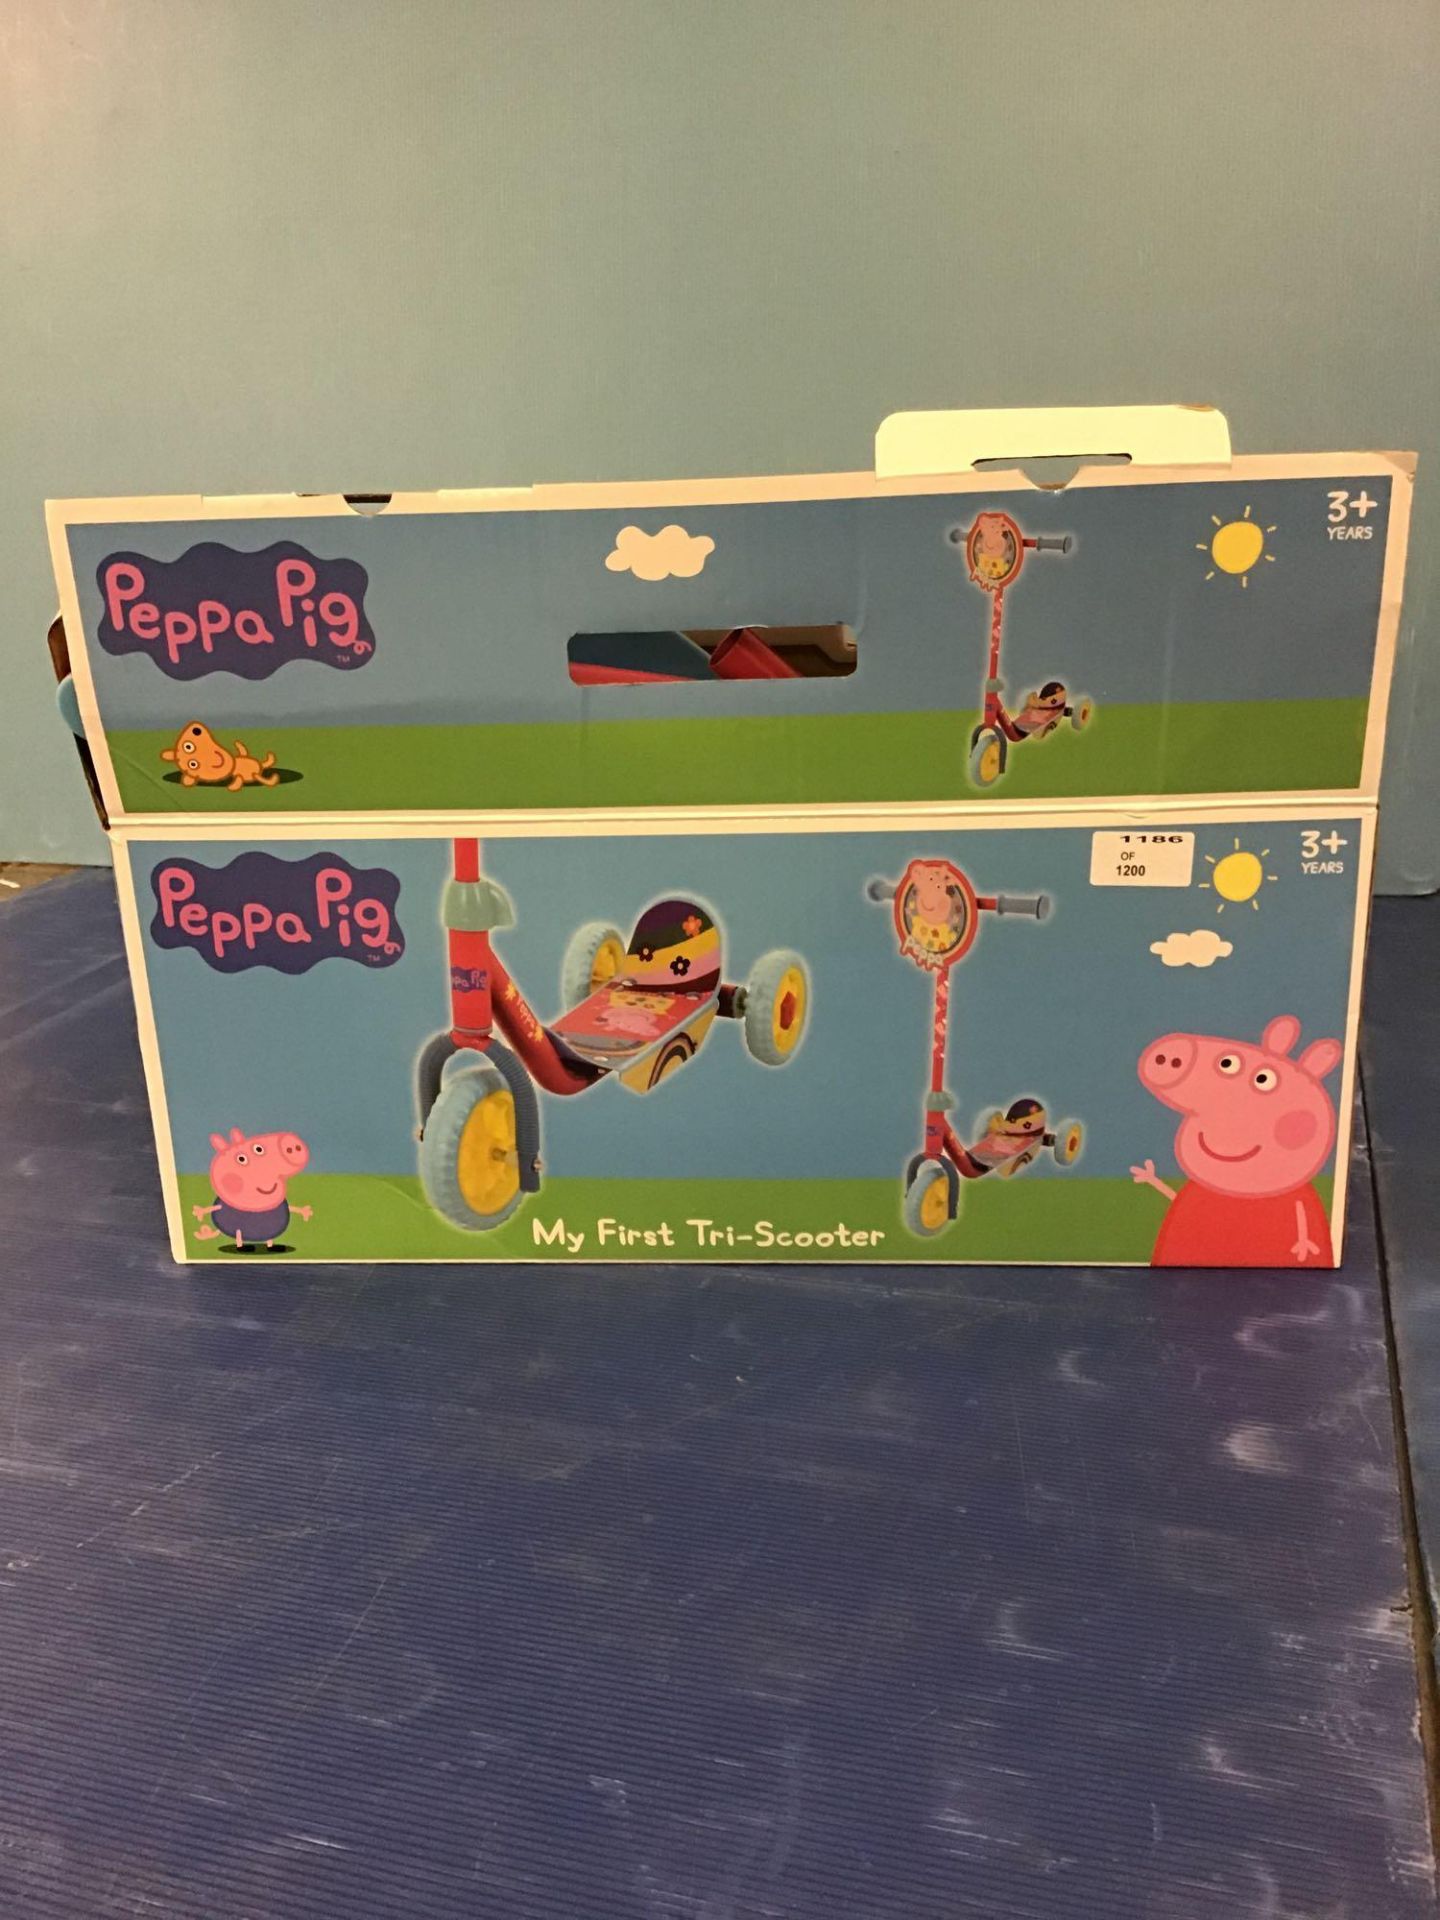 Peppa Pig Tri Scooter 867/9378 £16.99 RRP - Image 3 of 5